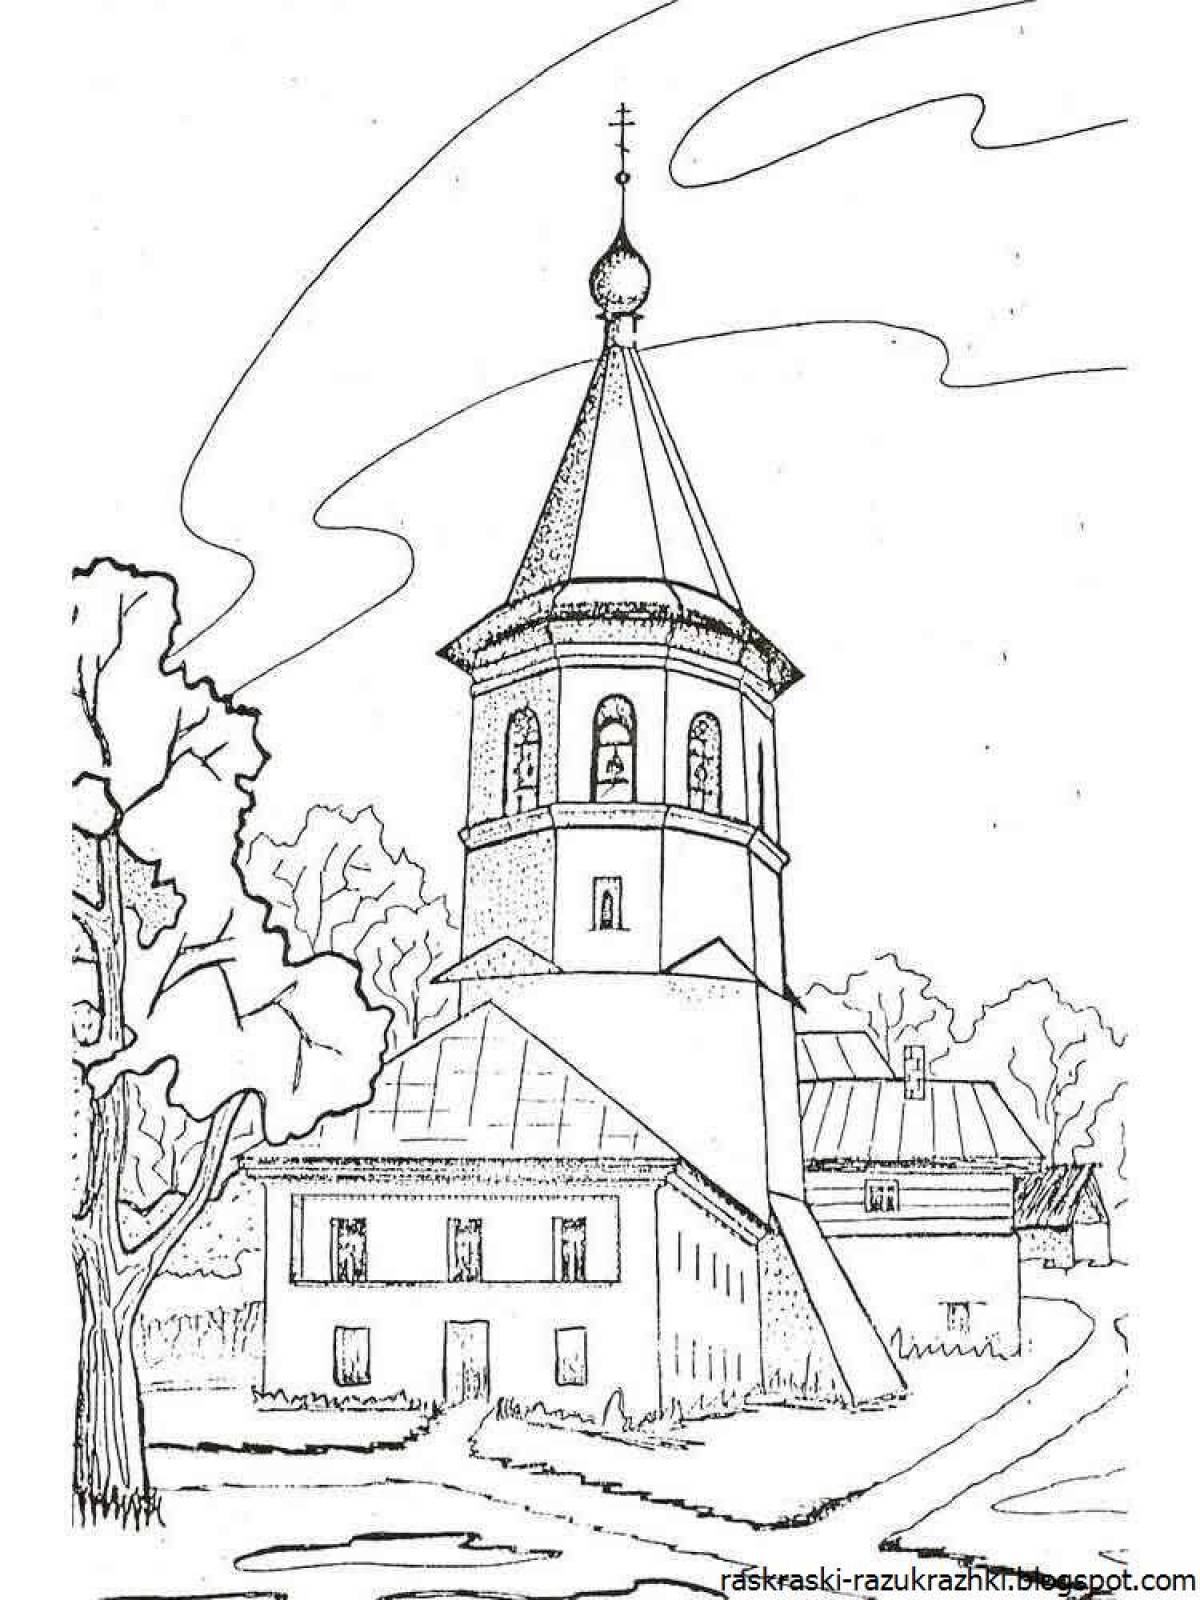 Great temple coloring book